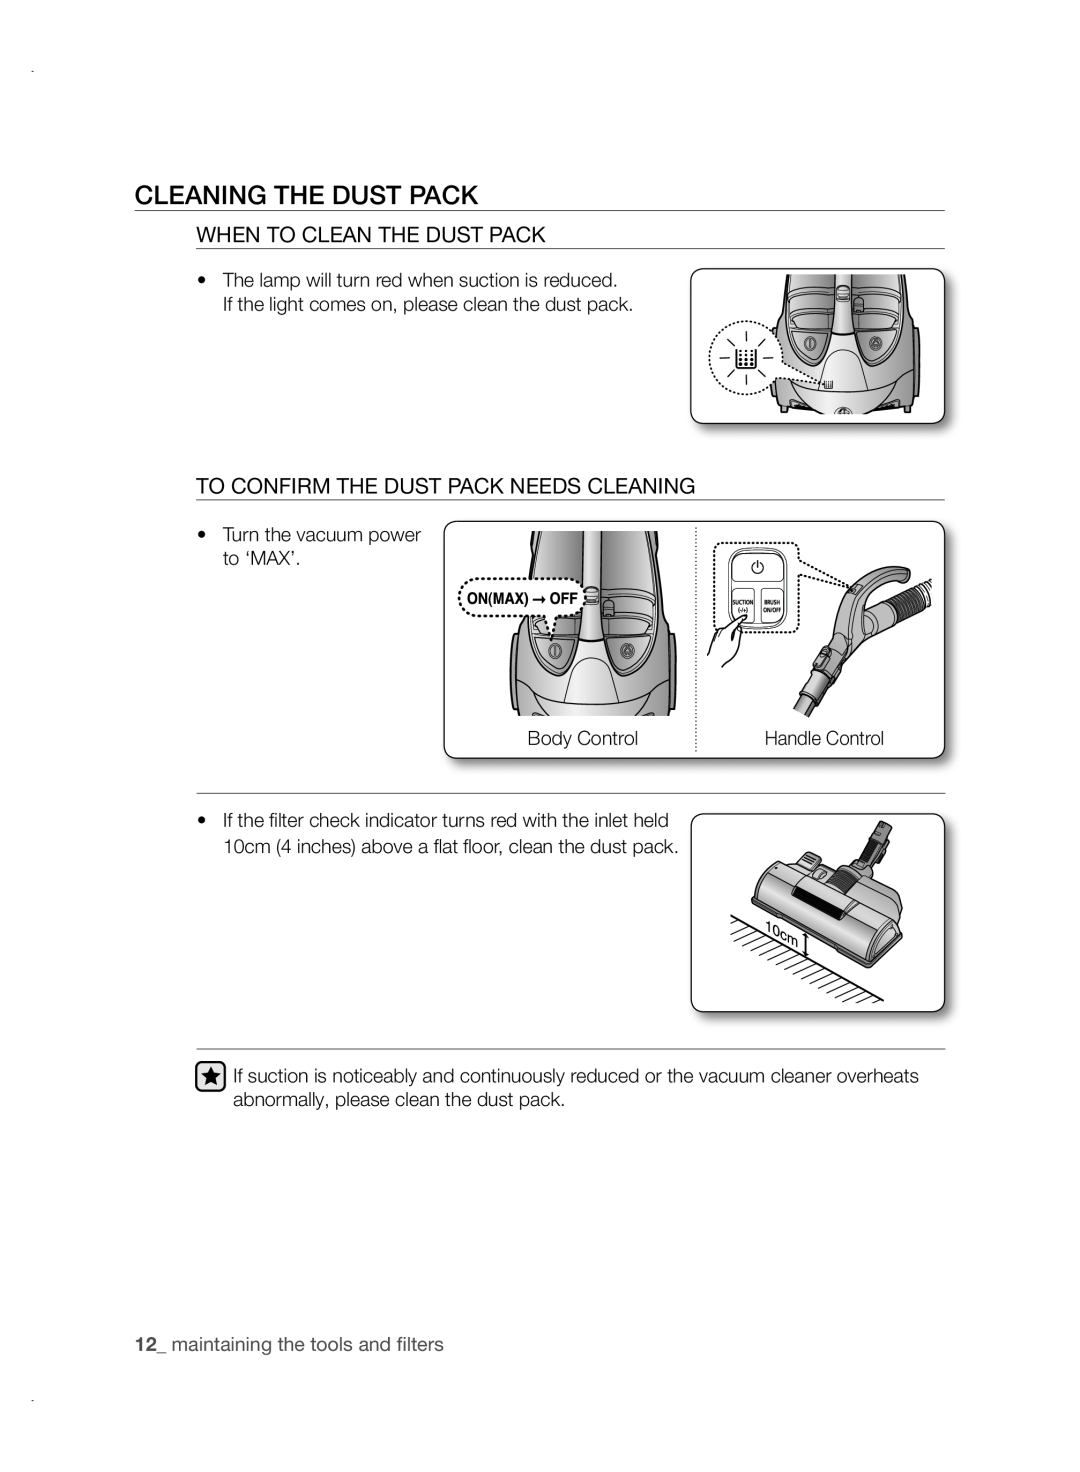 Samsung VCC88P0H1B user manual Cleaning The Dust Pack, When To Clean The Dust Pack, To Confirm The Dust Pack Needs Cleaning 